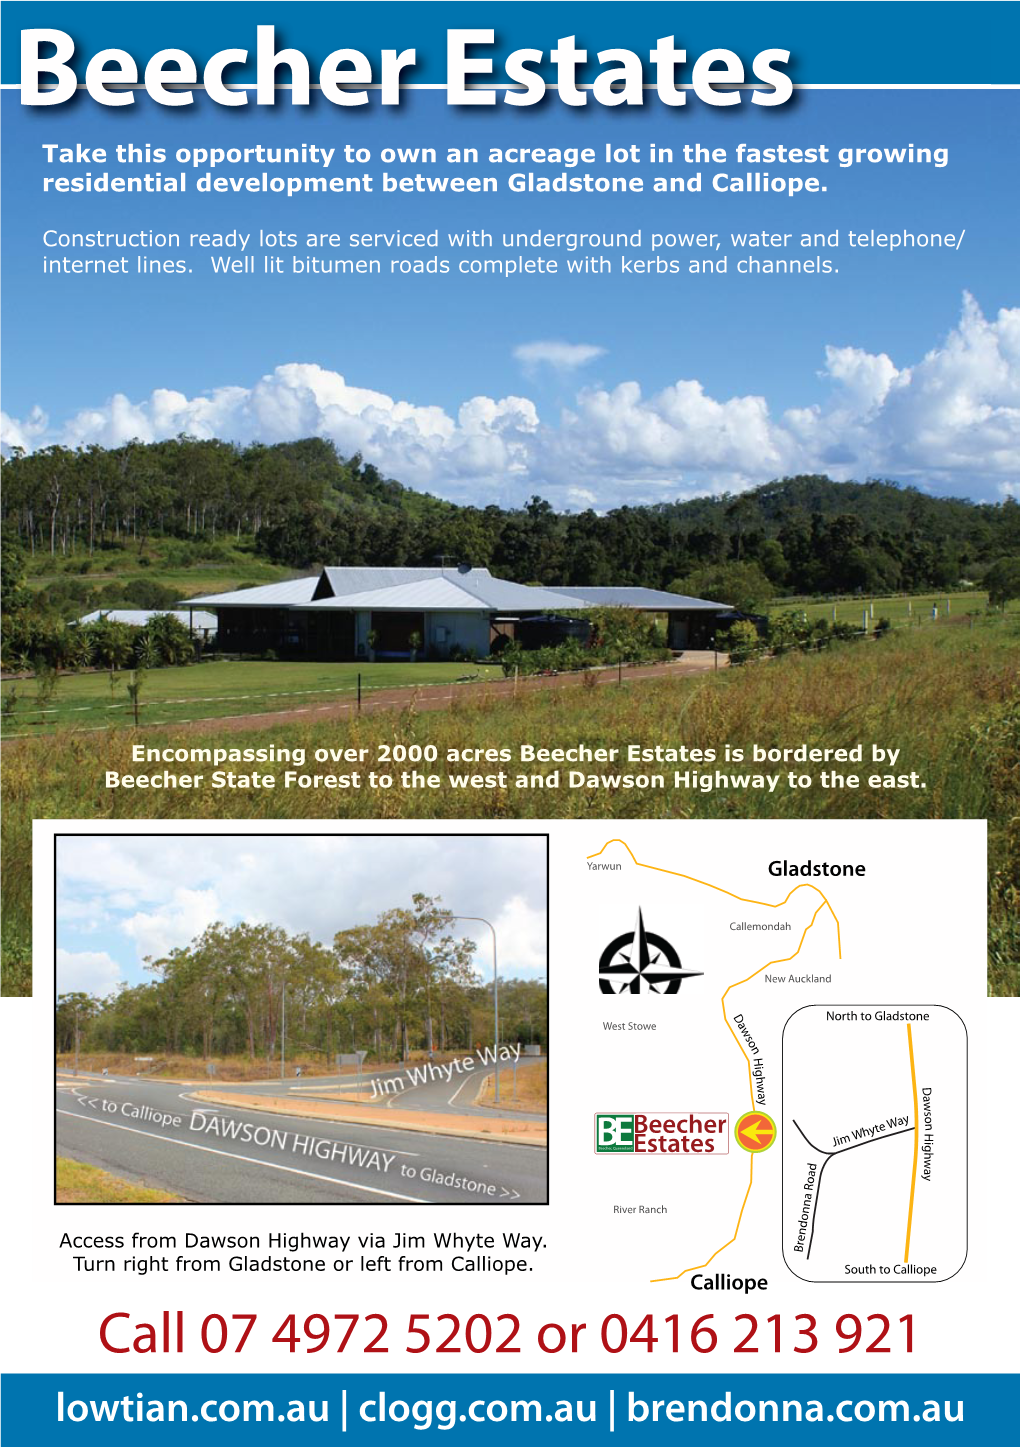 Beecher Estates Take This Opportunity to Own an Acreage Lot in the Fastest Growing Residential Development Between Gladstone and Calliope